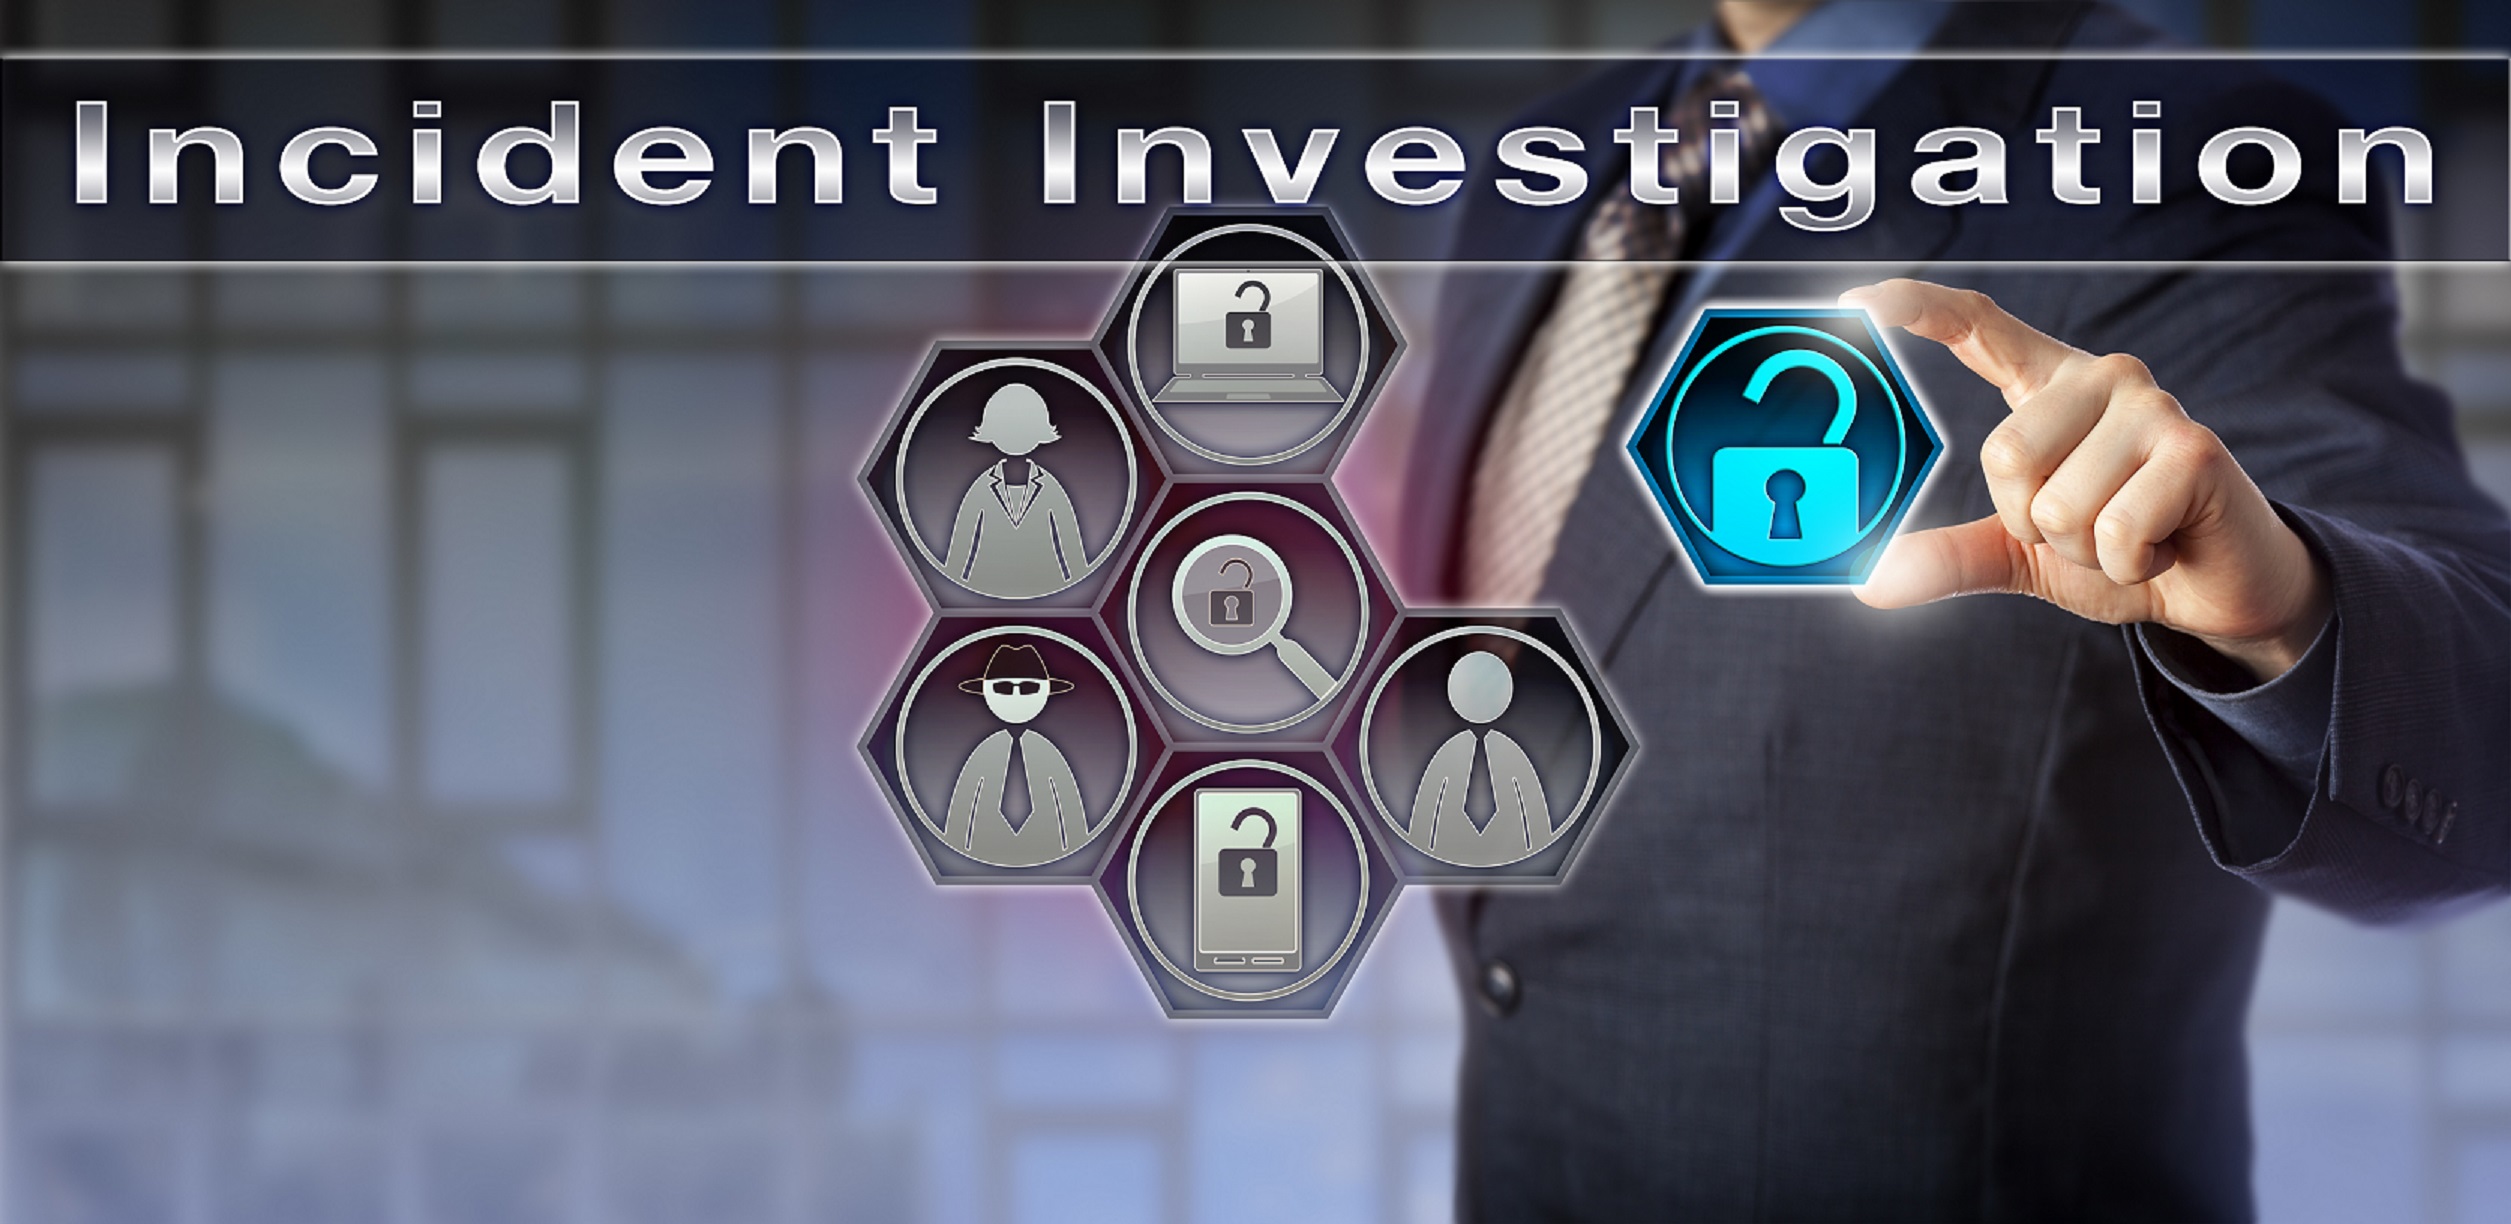 Incident investigations are part of a comprehensive occupational safety and health program.